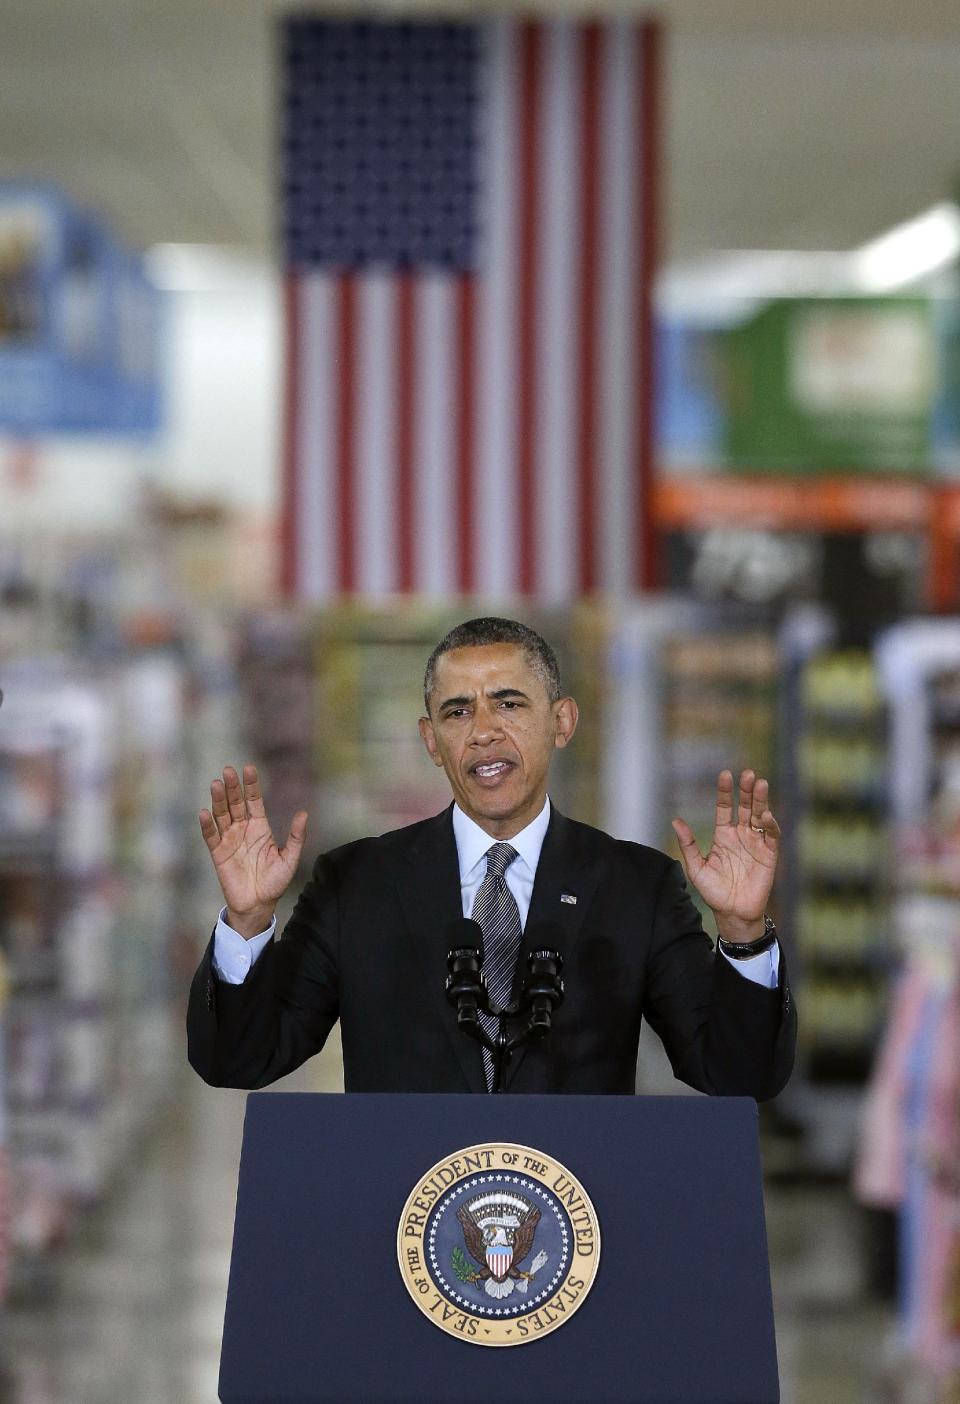 President Barack Obama speaks at a Walmart store in Mountain View, Calif., Friday, May 9, 2014. Obama announced new steps by companies, local governments and his own administration to deploy solar technology, showcasing steps to combat climate change that don't require consent from a disinclined Congress. (AP Photo/Jeff Chiu)